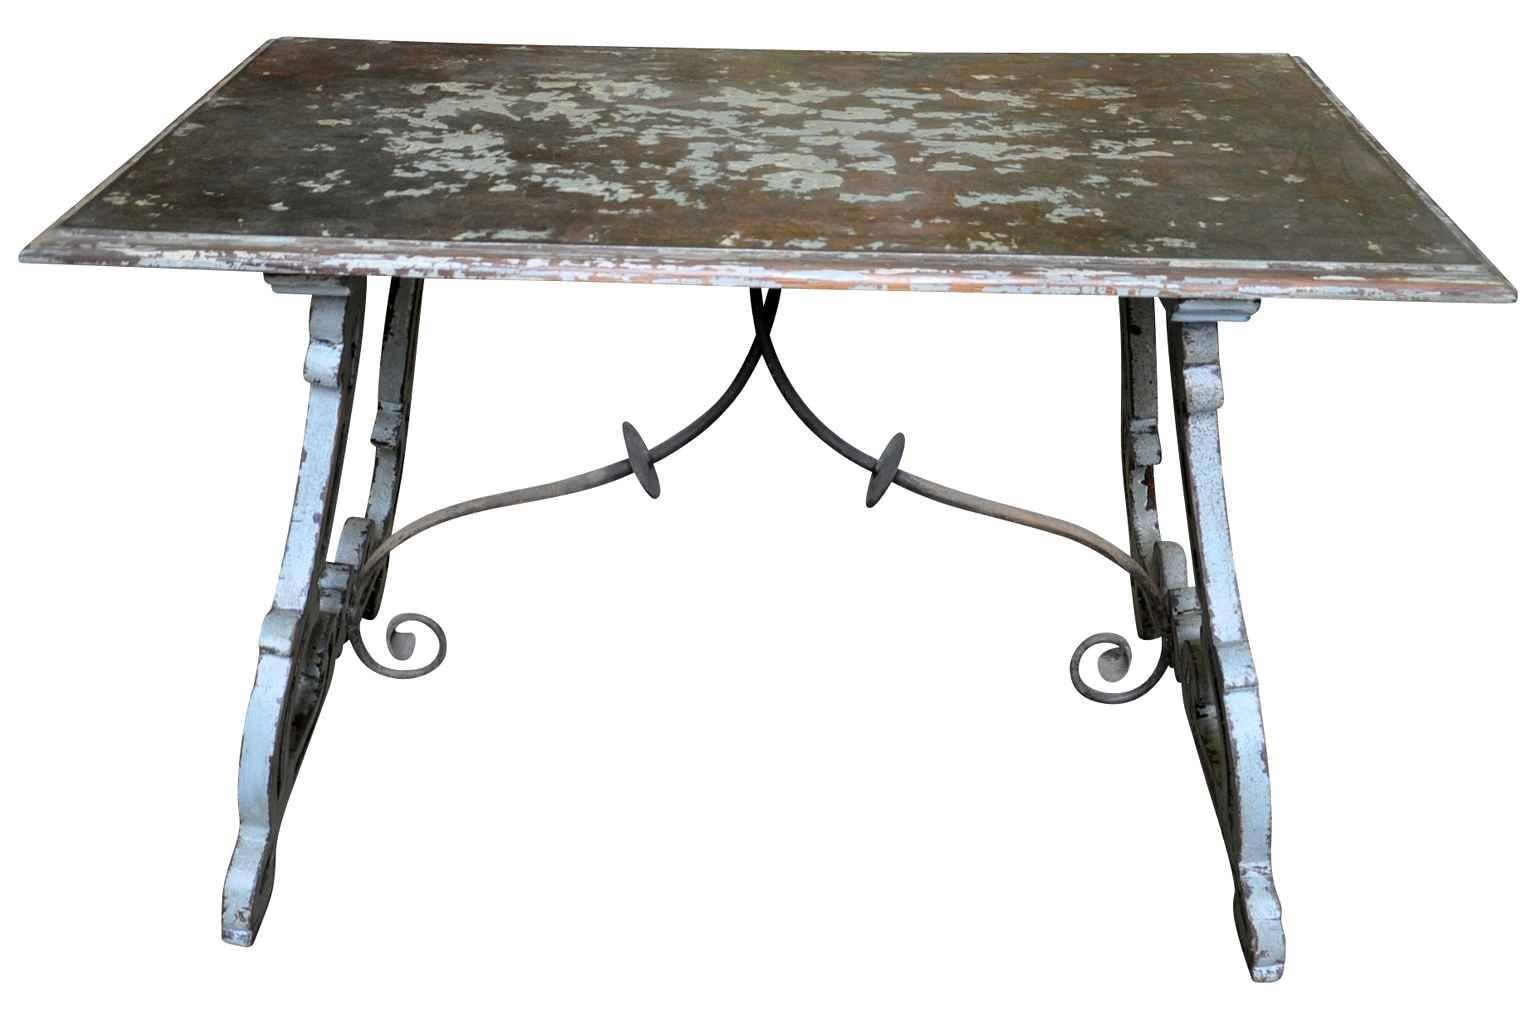 A very charming 19th century small farm table in painted wood with iron stretchers. Beautifully constructed with classical lyre legs. The top surface is wood with a wonderfully patina's metal surface, great looking! Ideal as a smaller dining table